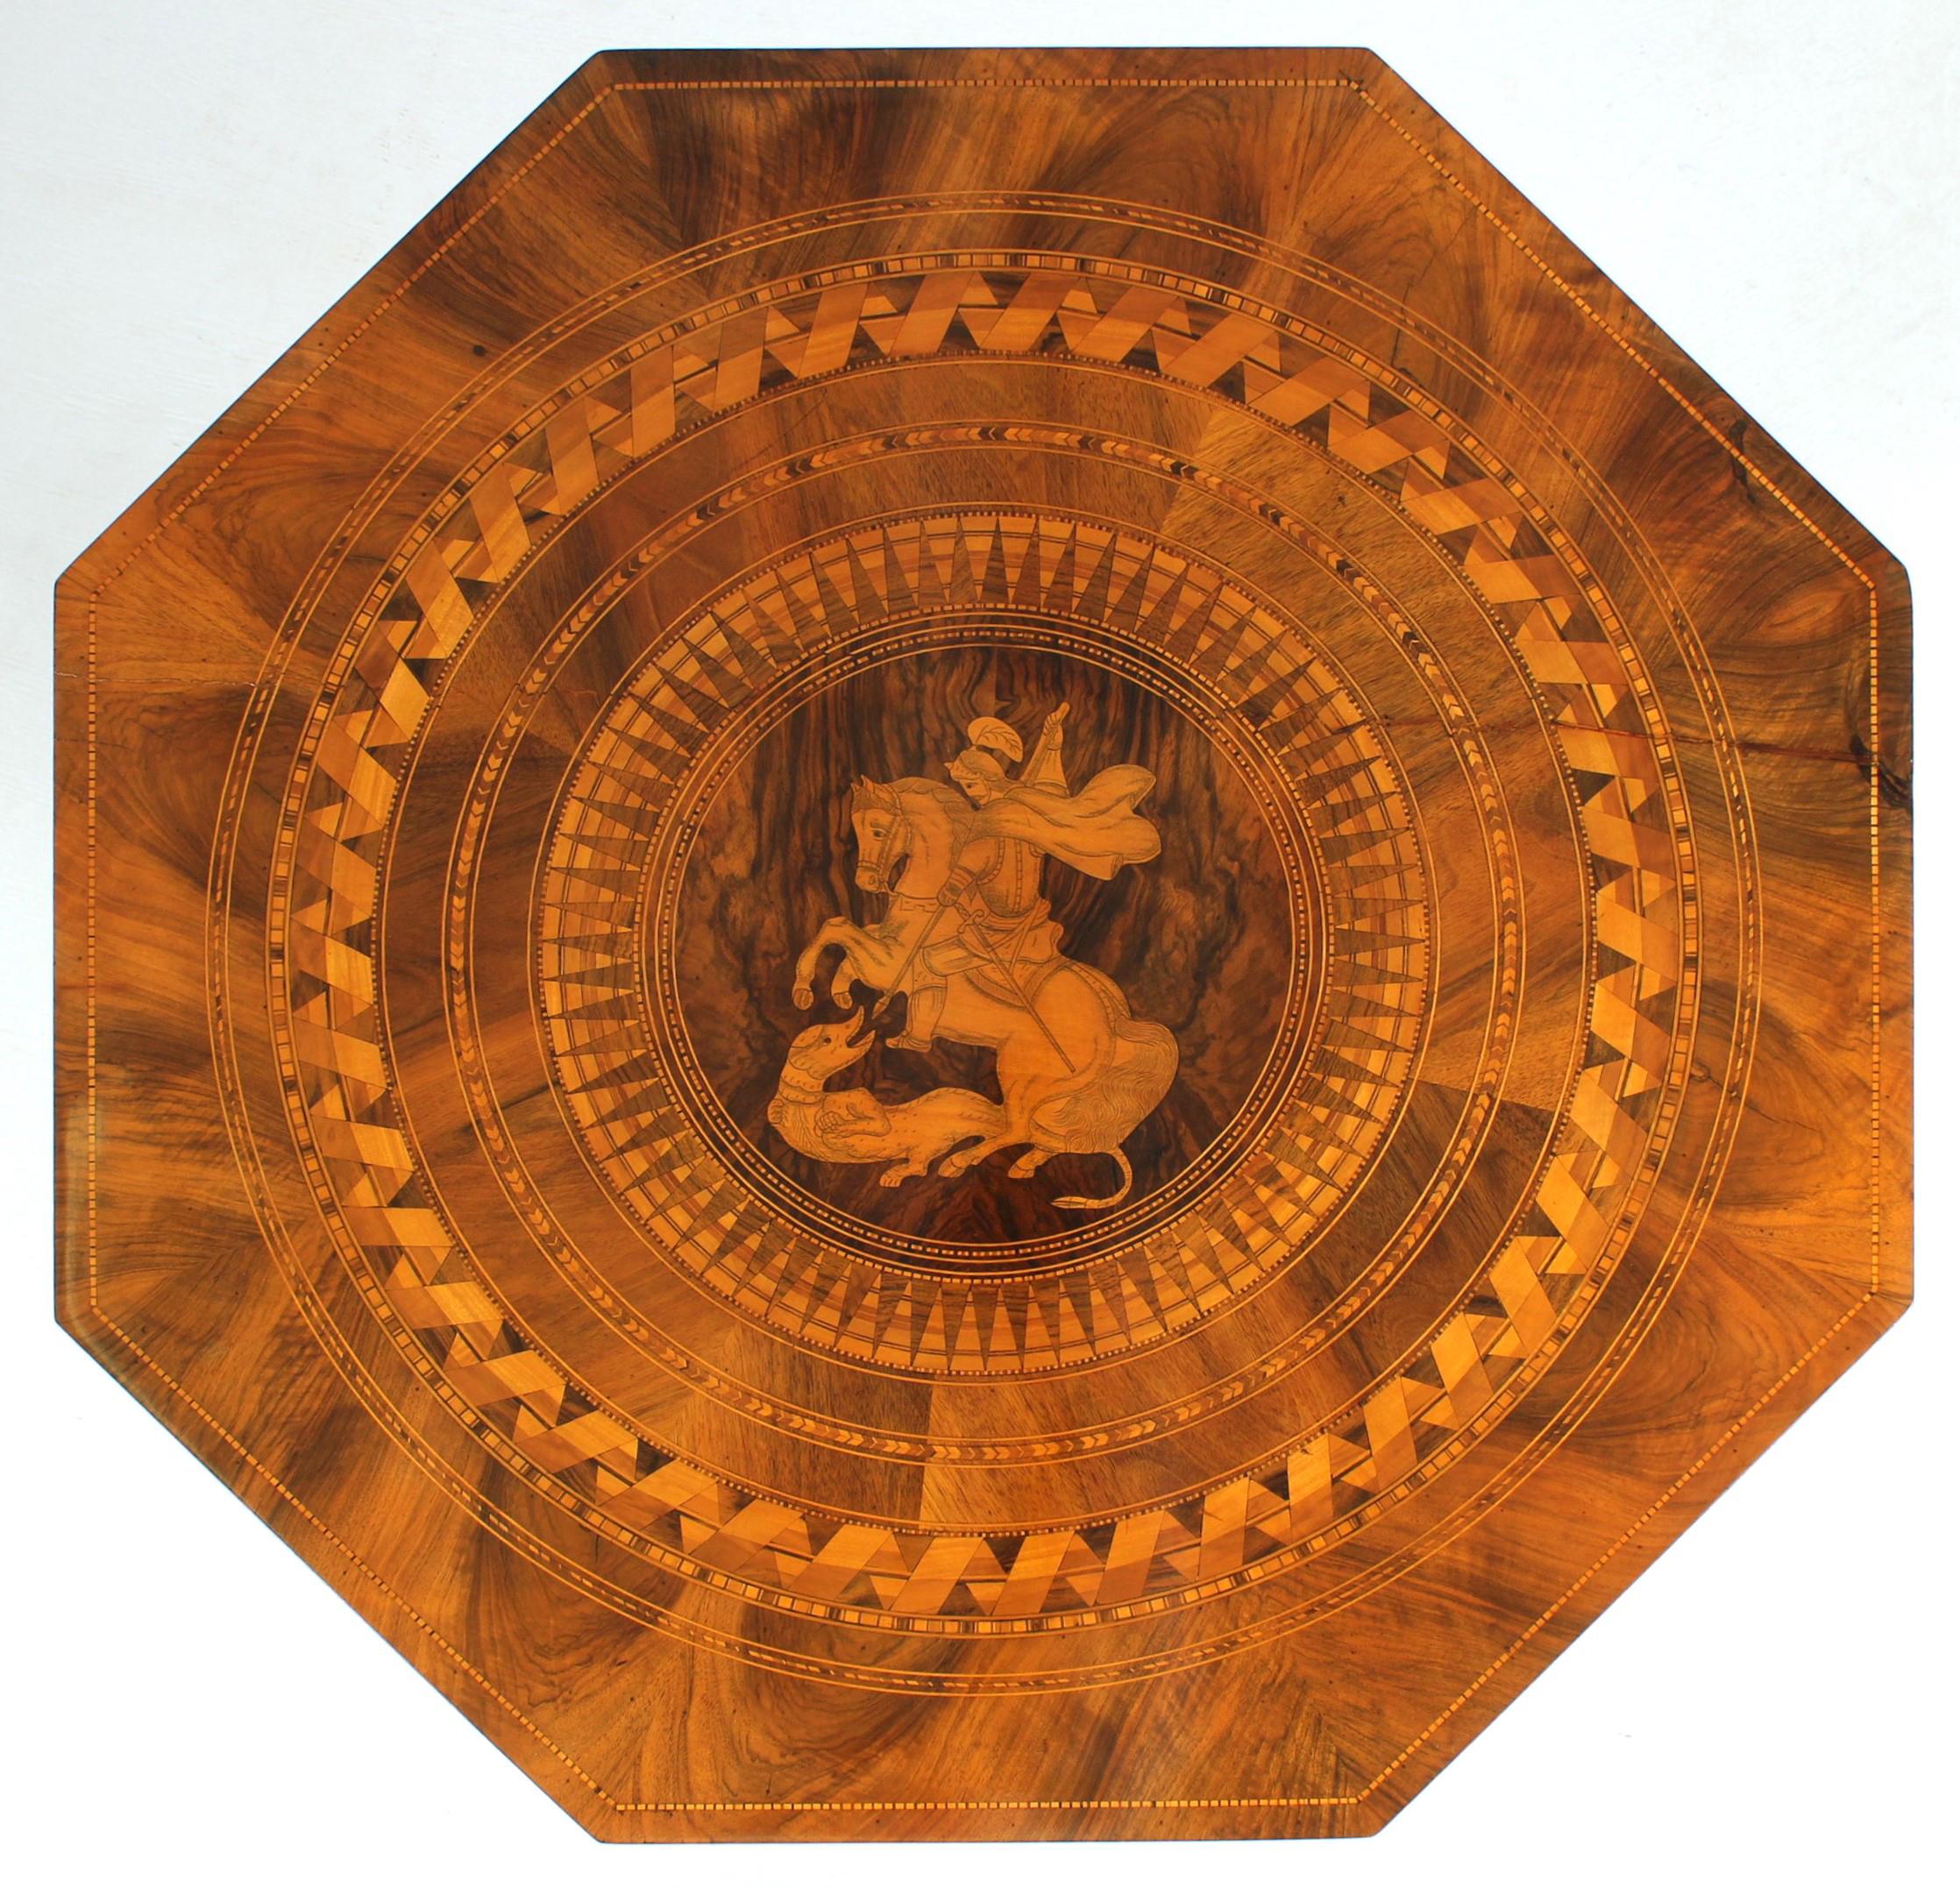 Antique side table - George fighting the dragon

Italy
Walnut a.o.
Historicism around 1880

Dimensions: H x W x D: 73 cm x 74 cm x 74 cm

Description:
Very richly inlaid and marquetry piece of furniture.
Baluster base with fillet band made of maple